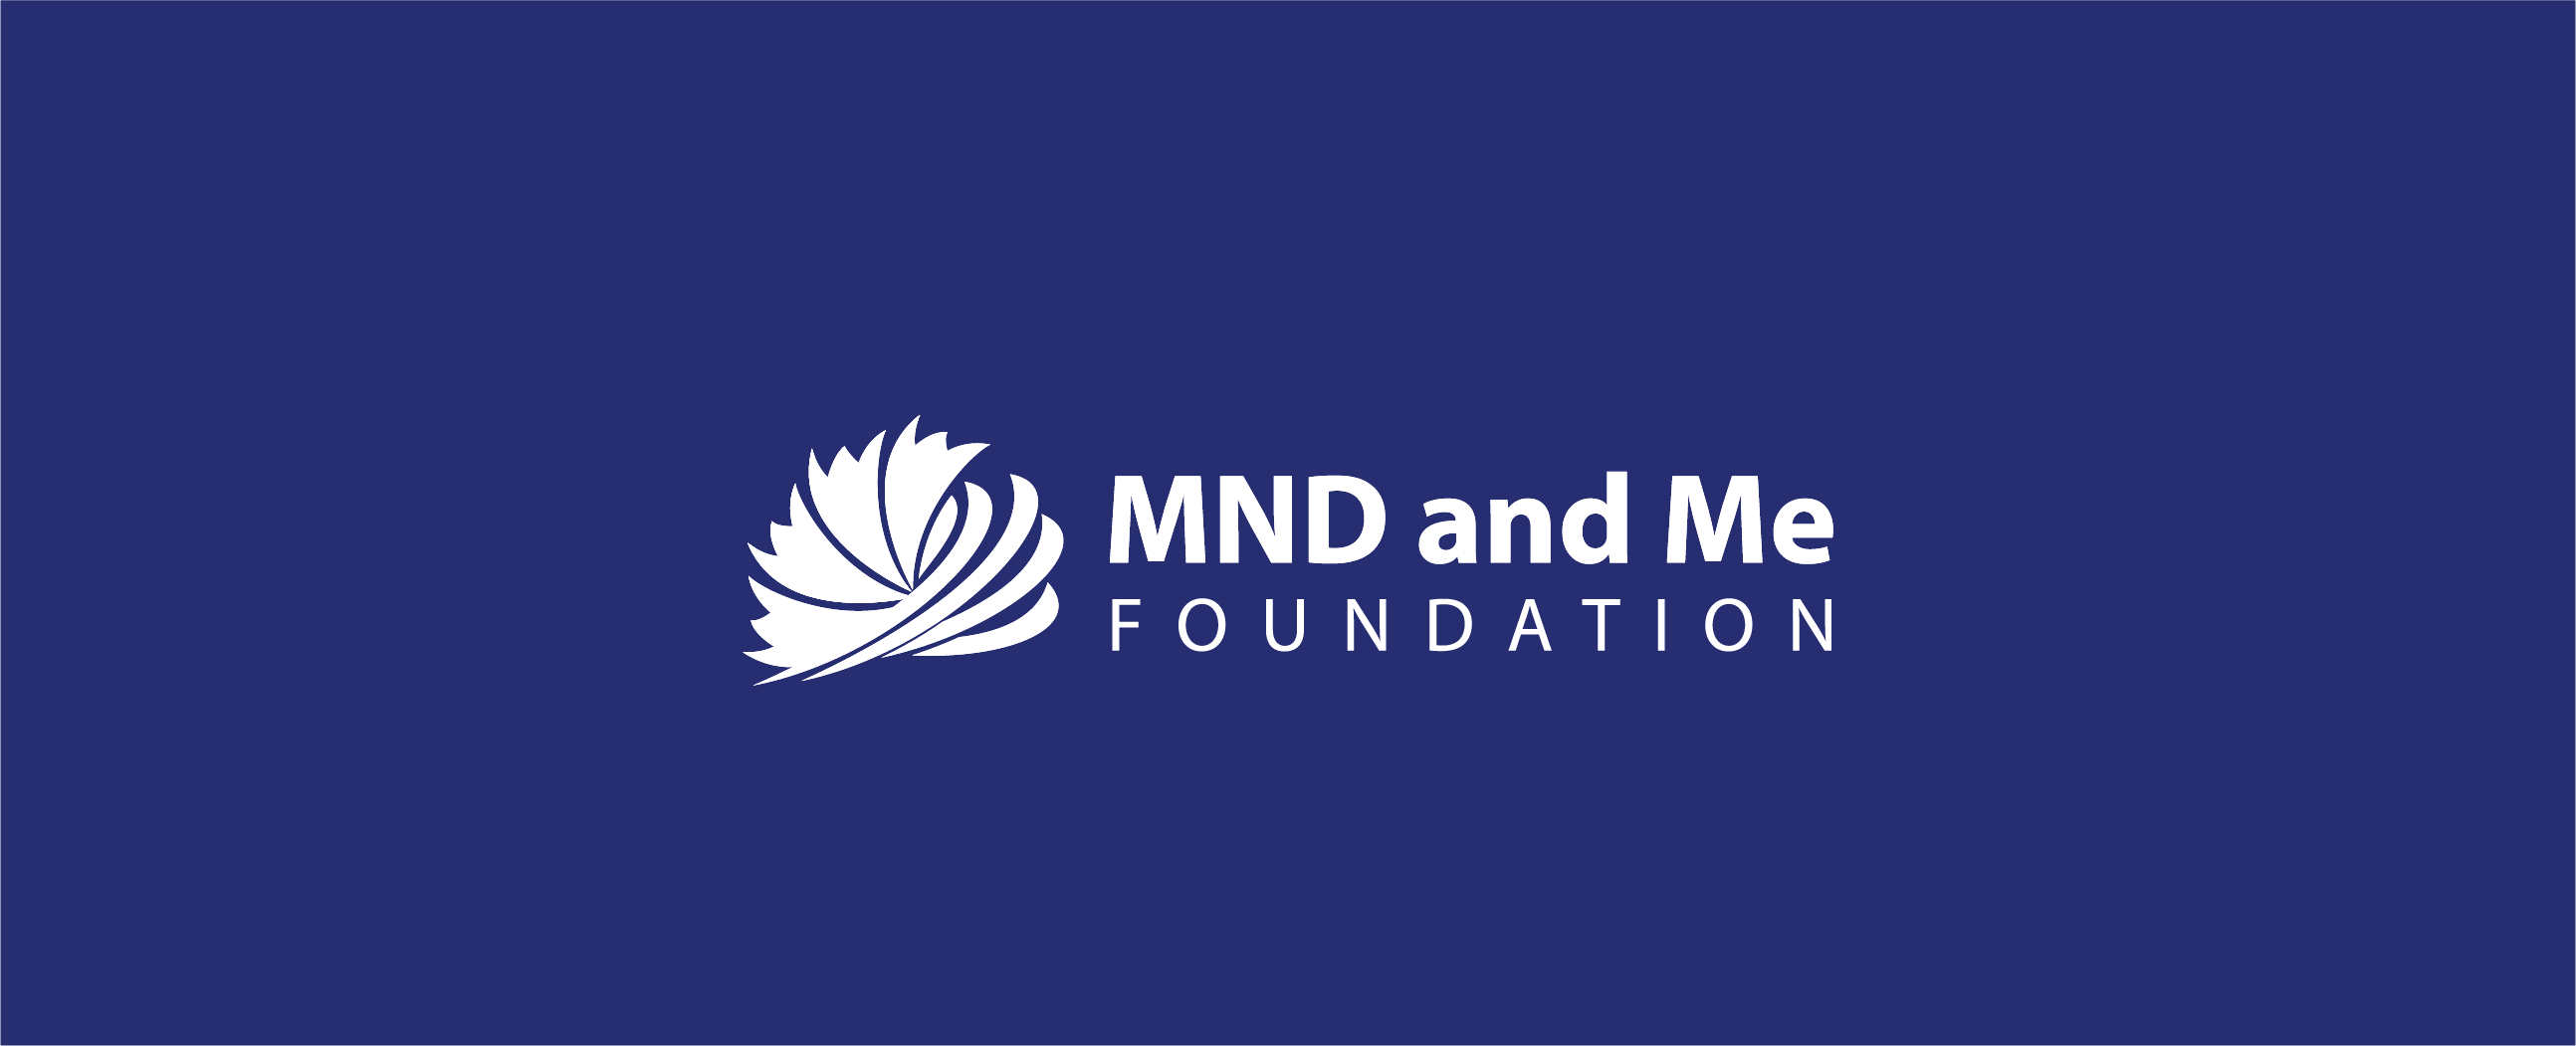 MND and ME Foundation